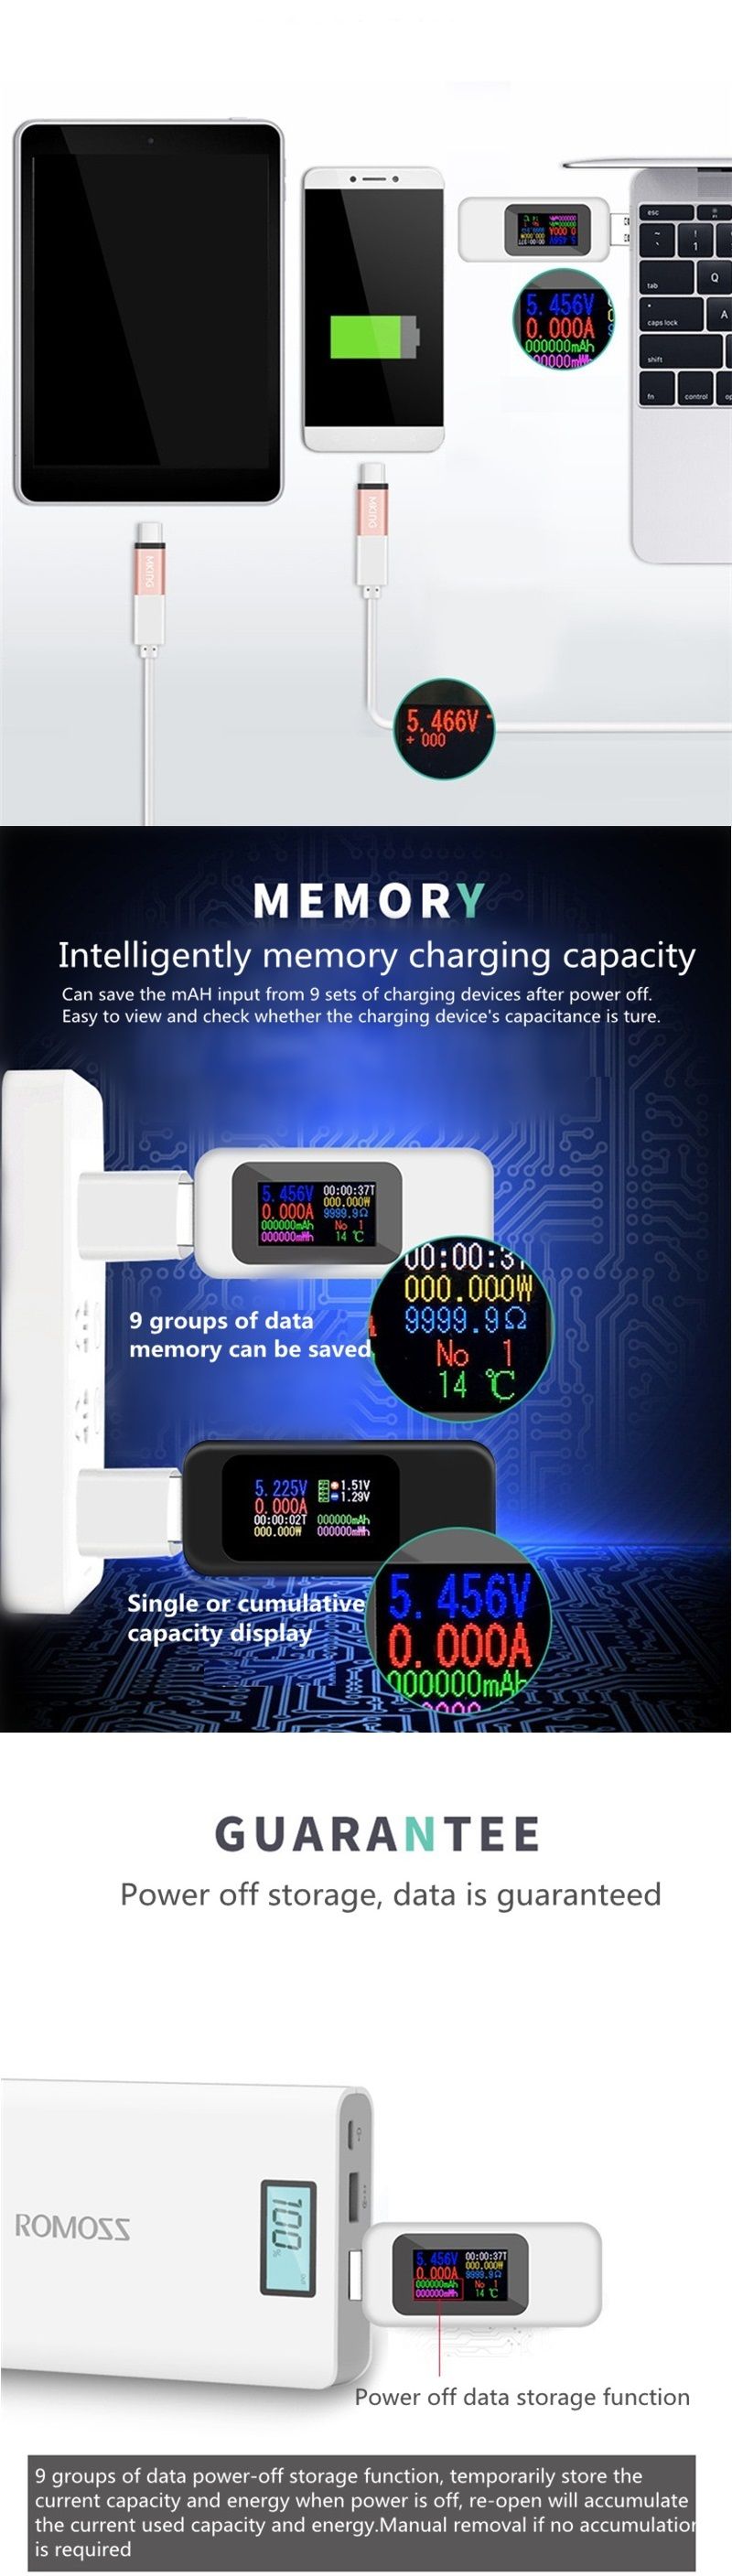 DANIU-Digital-10-in-1-Colorful-LCD-Display-USB-Tester-Voltage-Current-Tester-USB-Charger-Tester-Powe-1439163